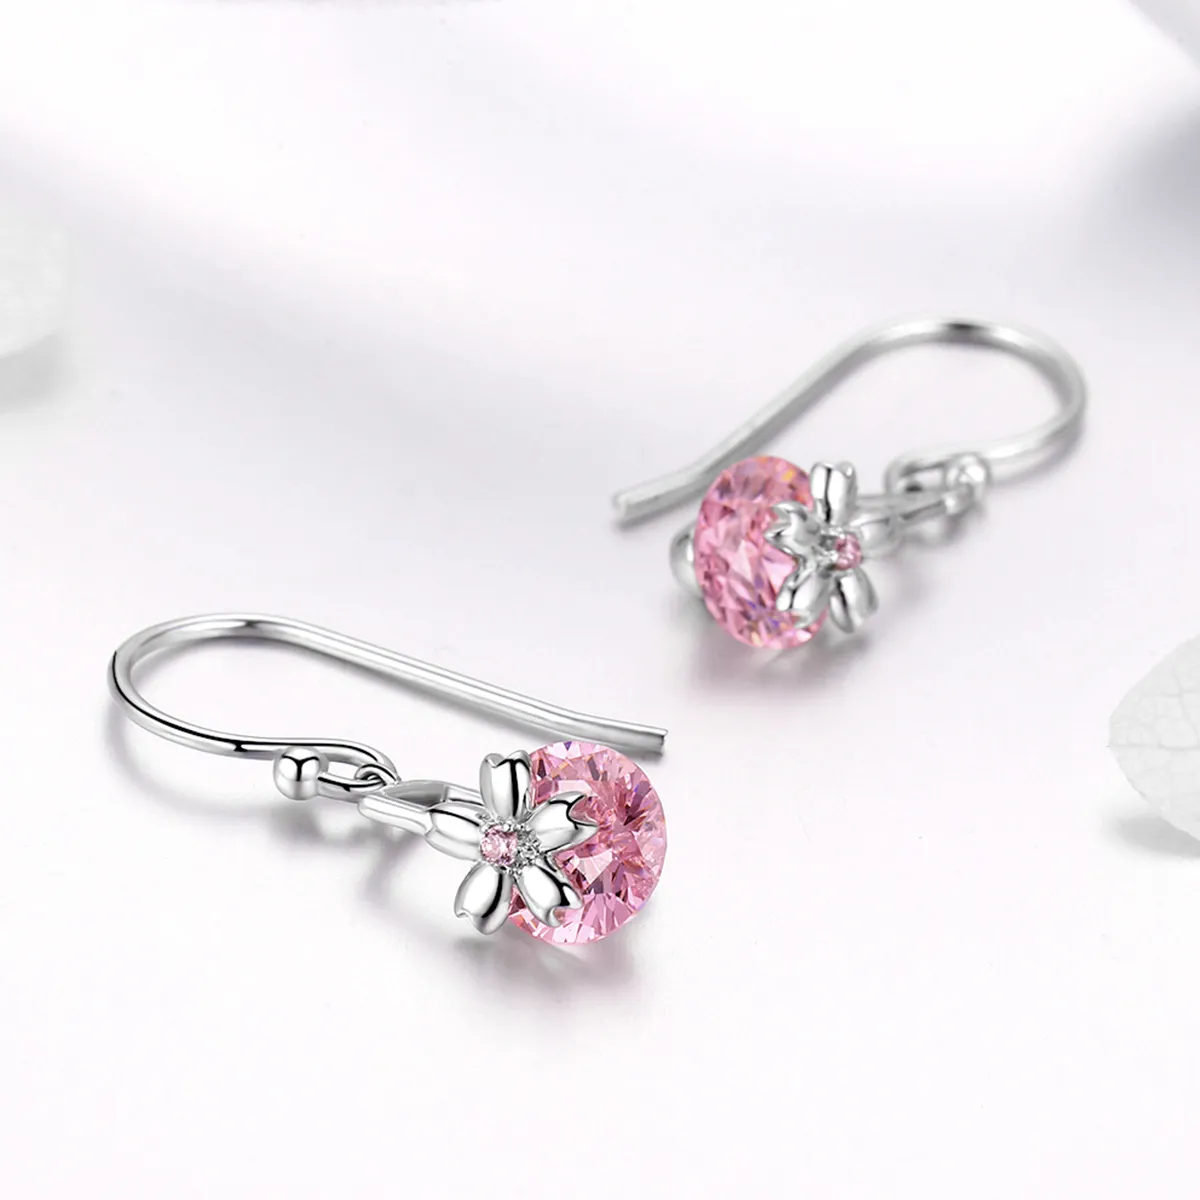 Pandora Style Cherry Blossoms Hanging Earrings - BSE039